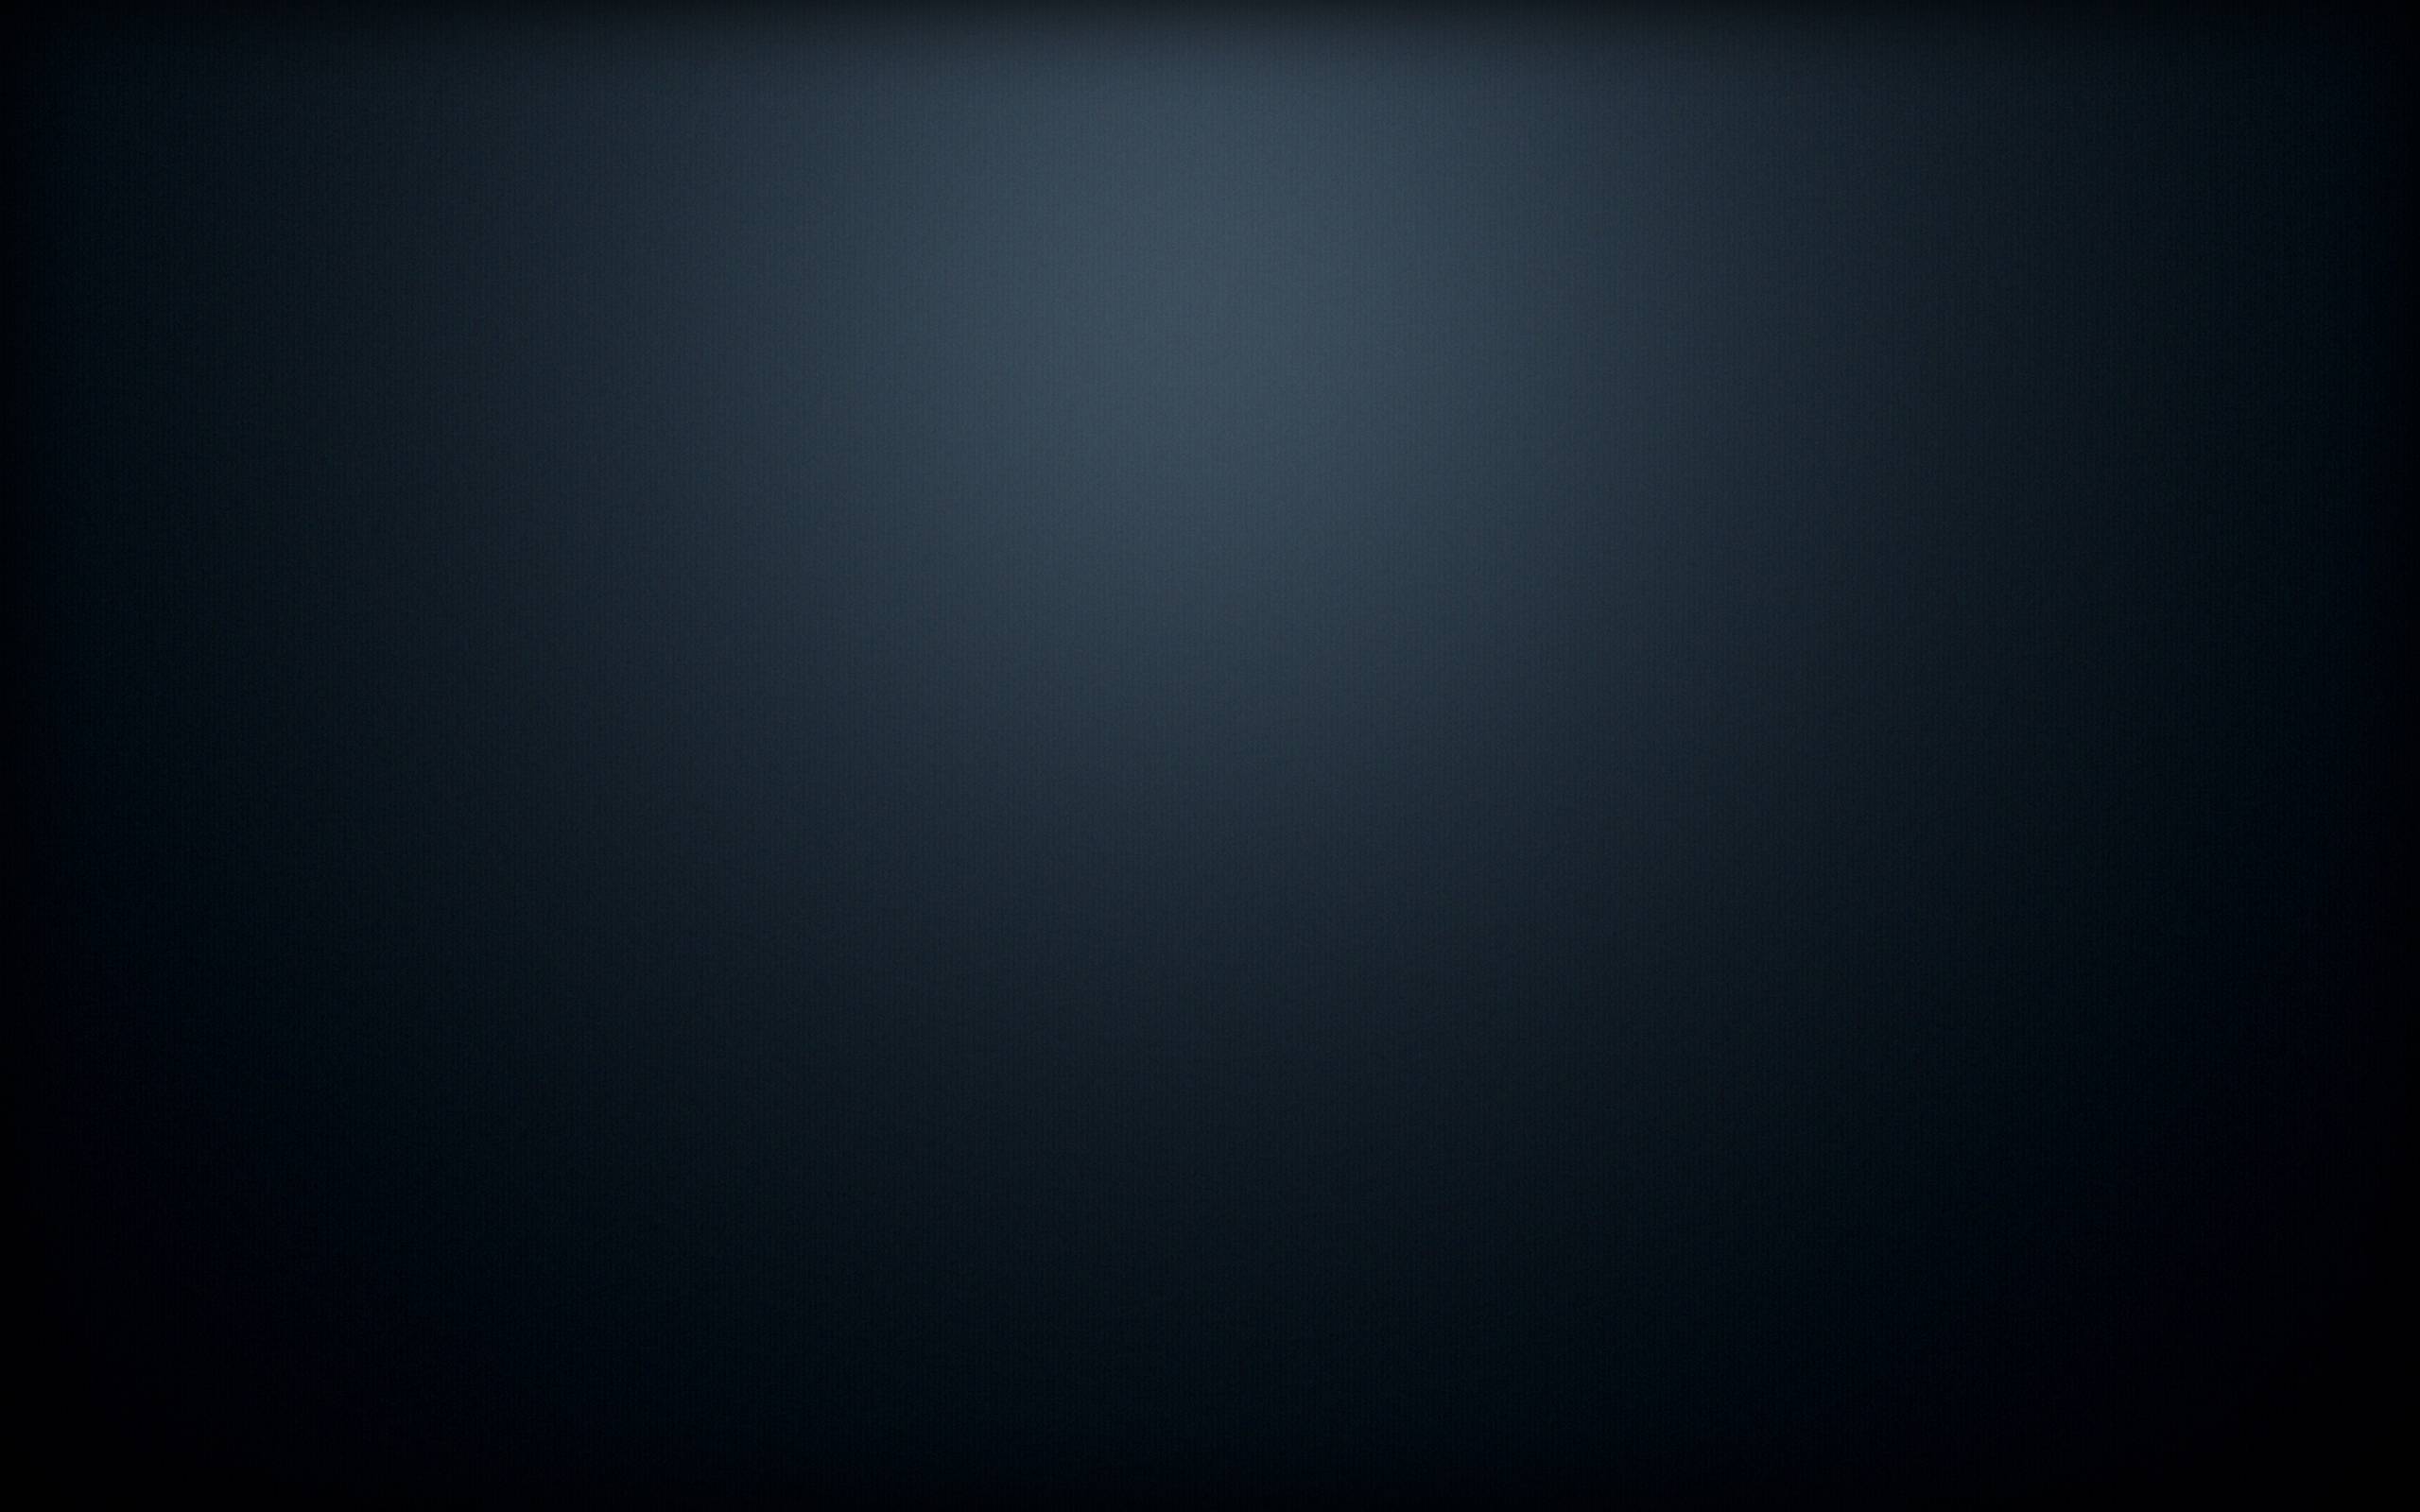 Wallpaper HD For Navy Blue Page Of Dark Image Androids